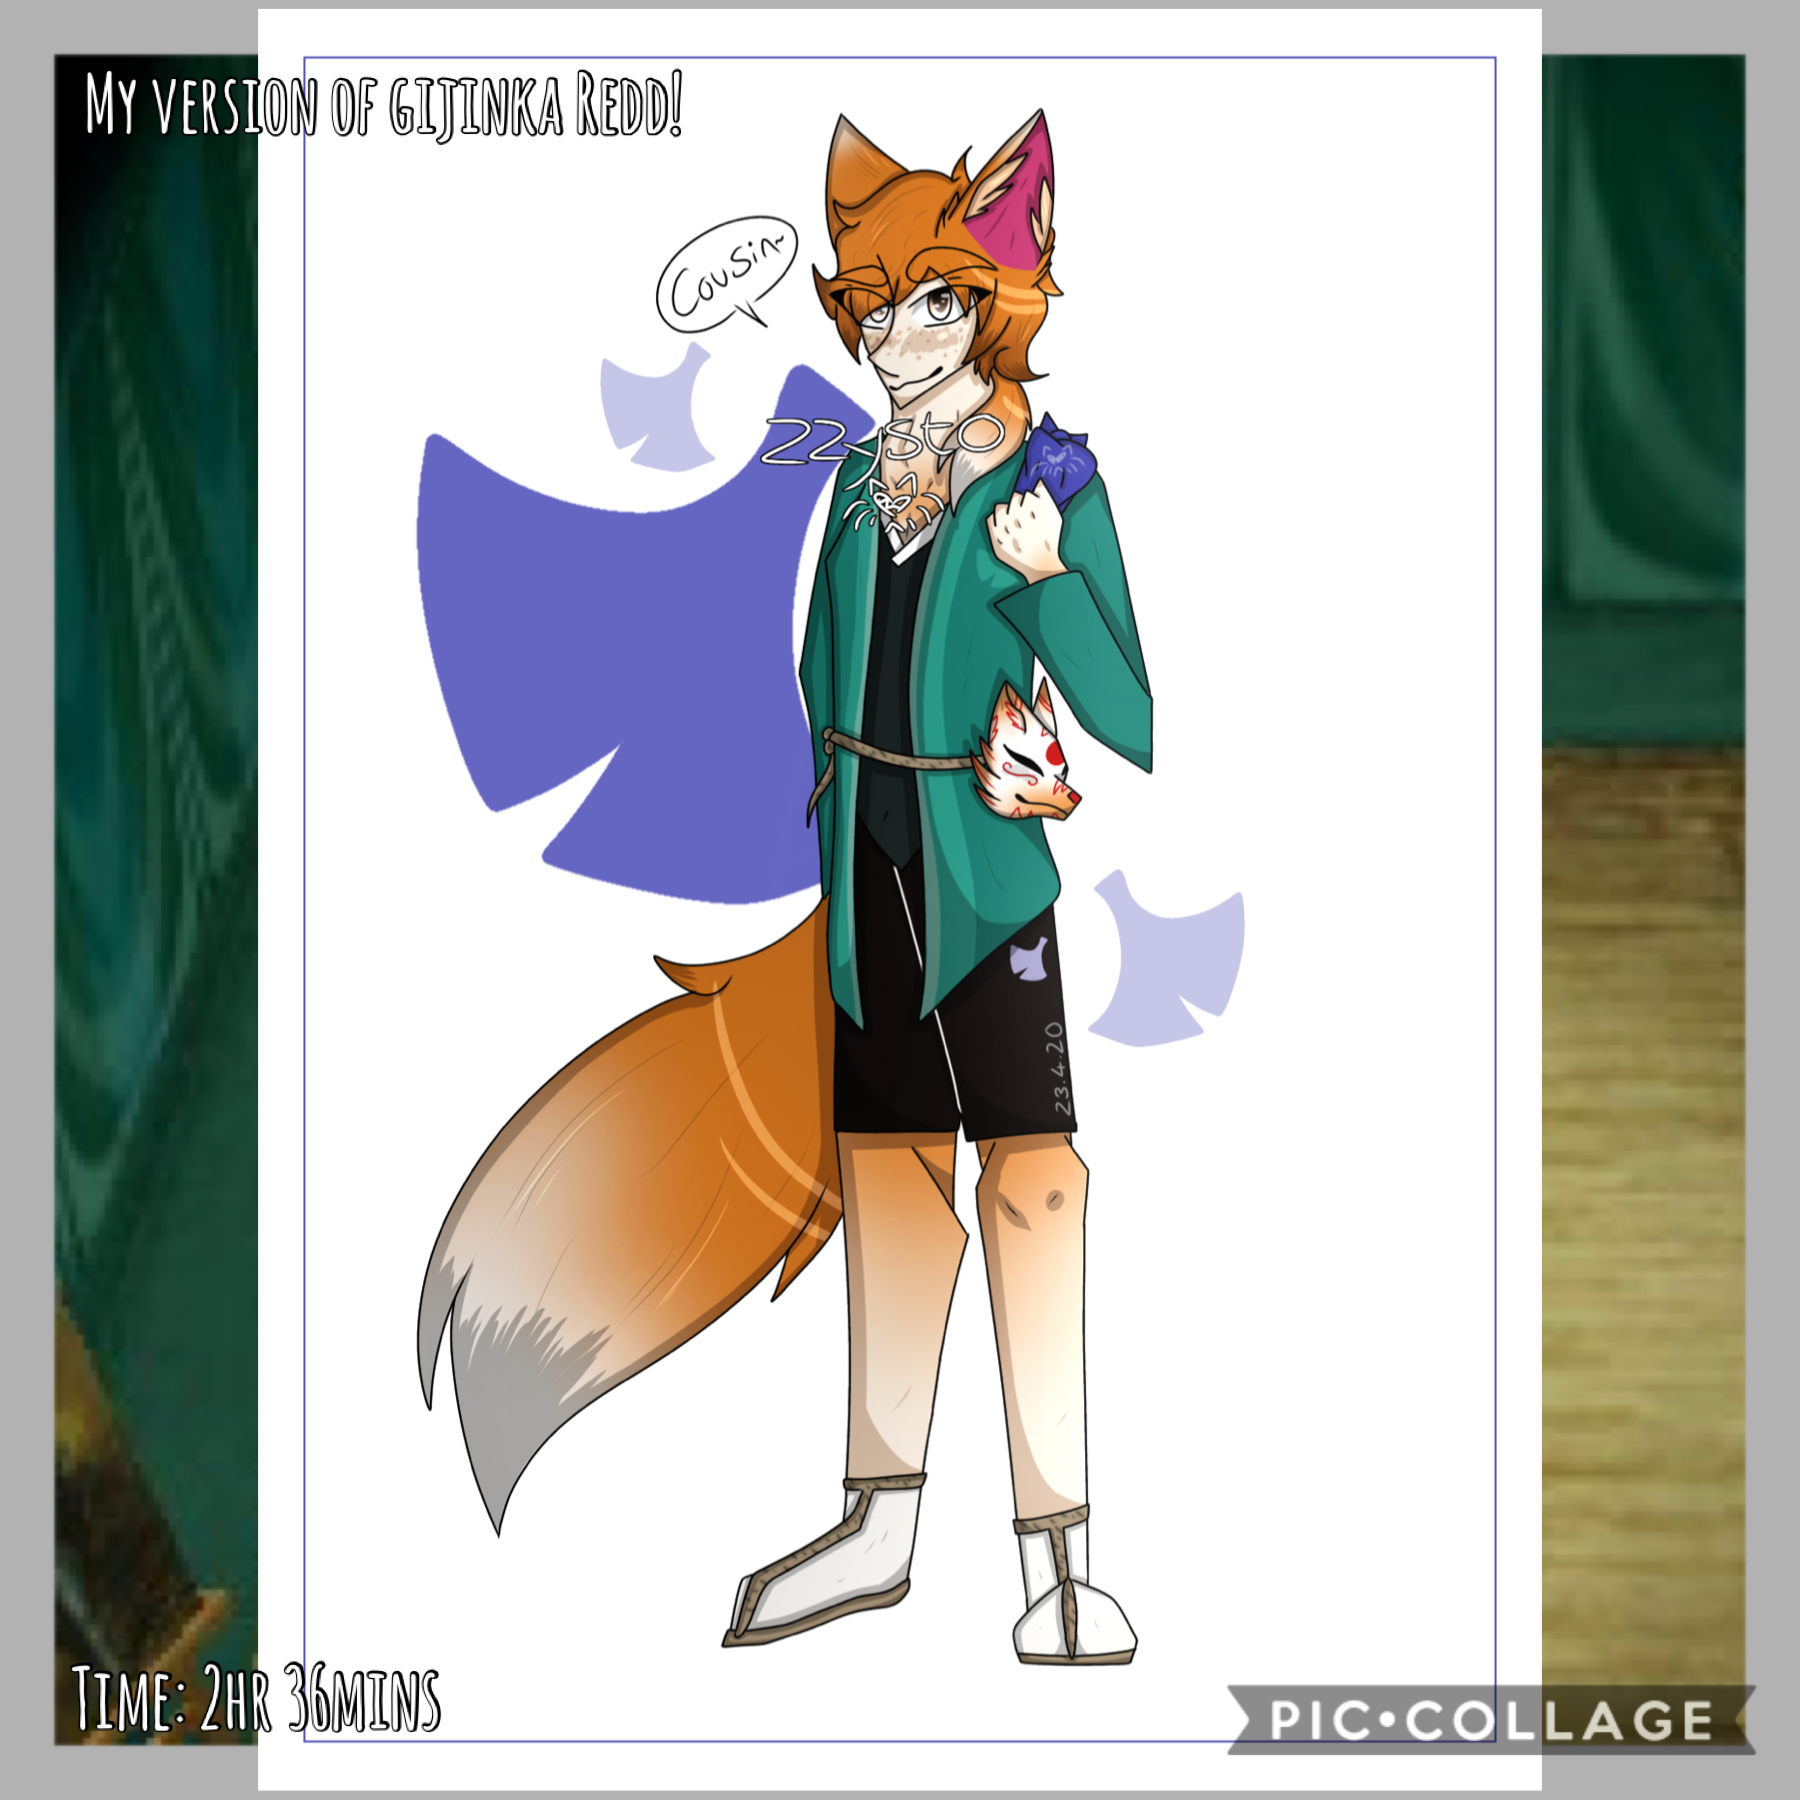 🦊Tap🦊
mm here’s another with my favourite merchant, Redd! 
Apparently here’s an ACNH update that introduces Redd today.? ee I’m glad they added him :]
shh I didn’t know how to show he was a kitsune, so I gave him a mask-